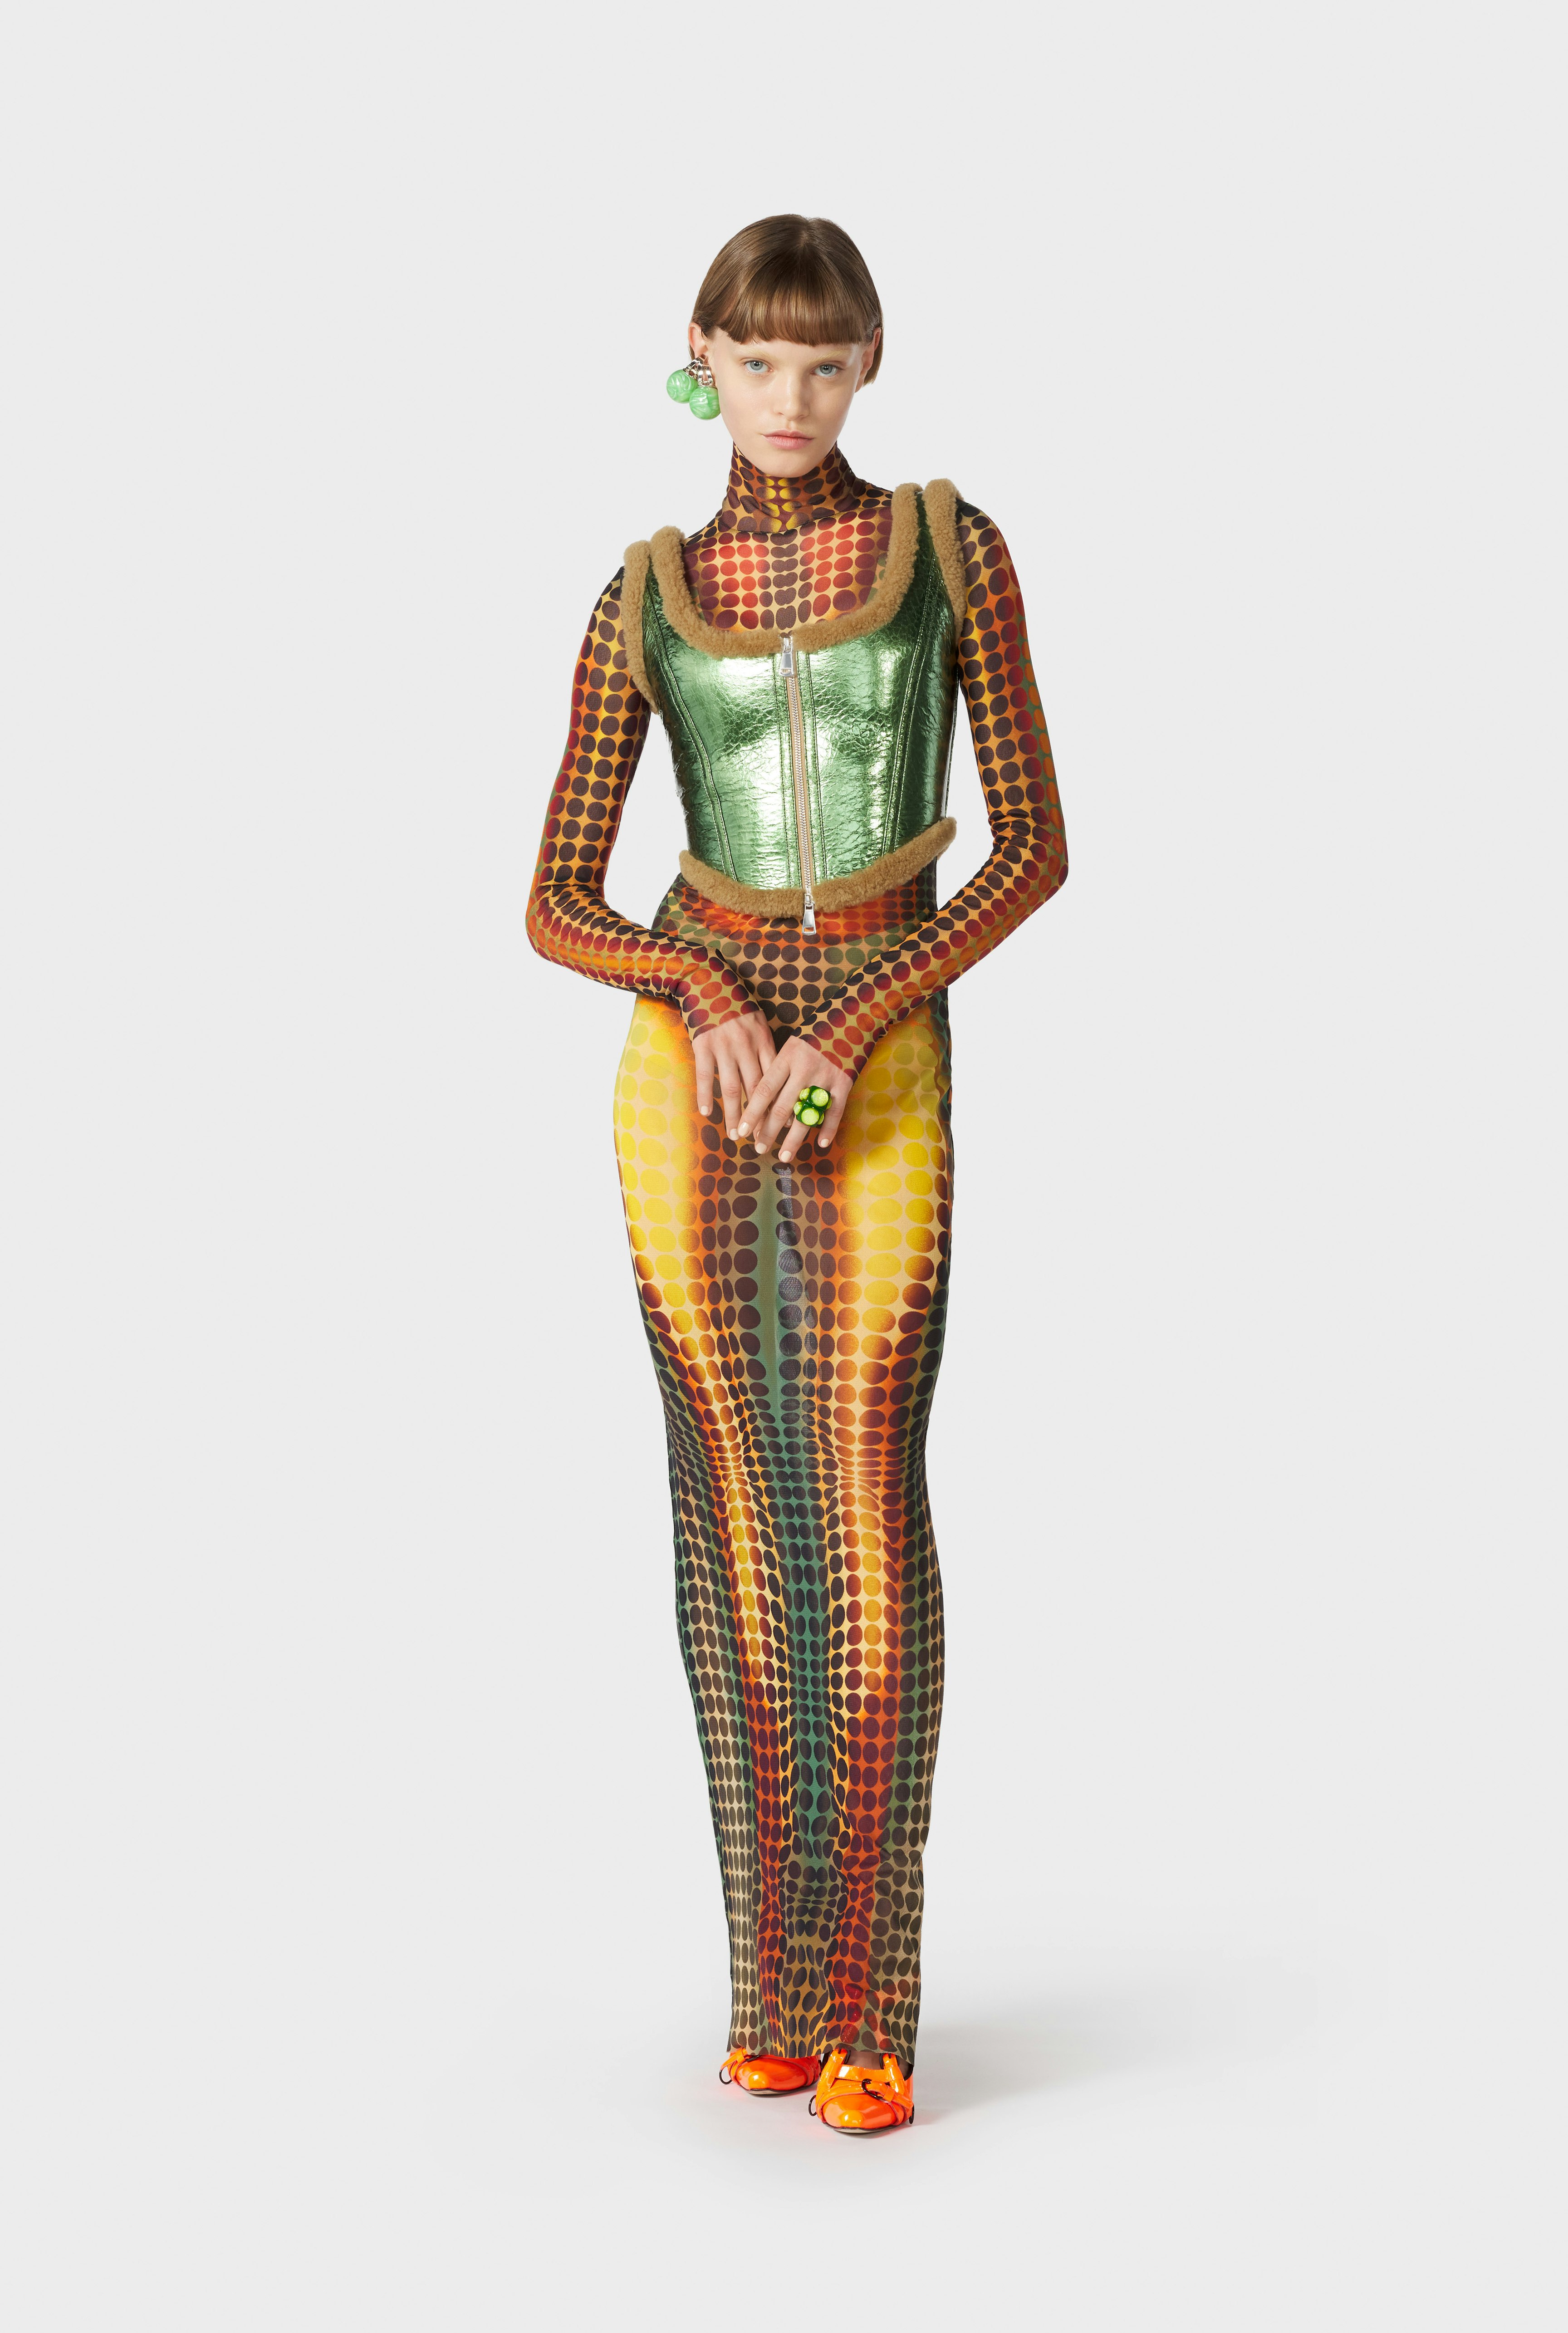 The Laminated Green Corset Jean Paul Gaultier